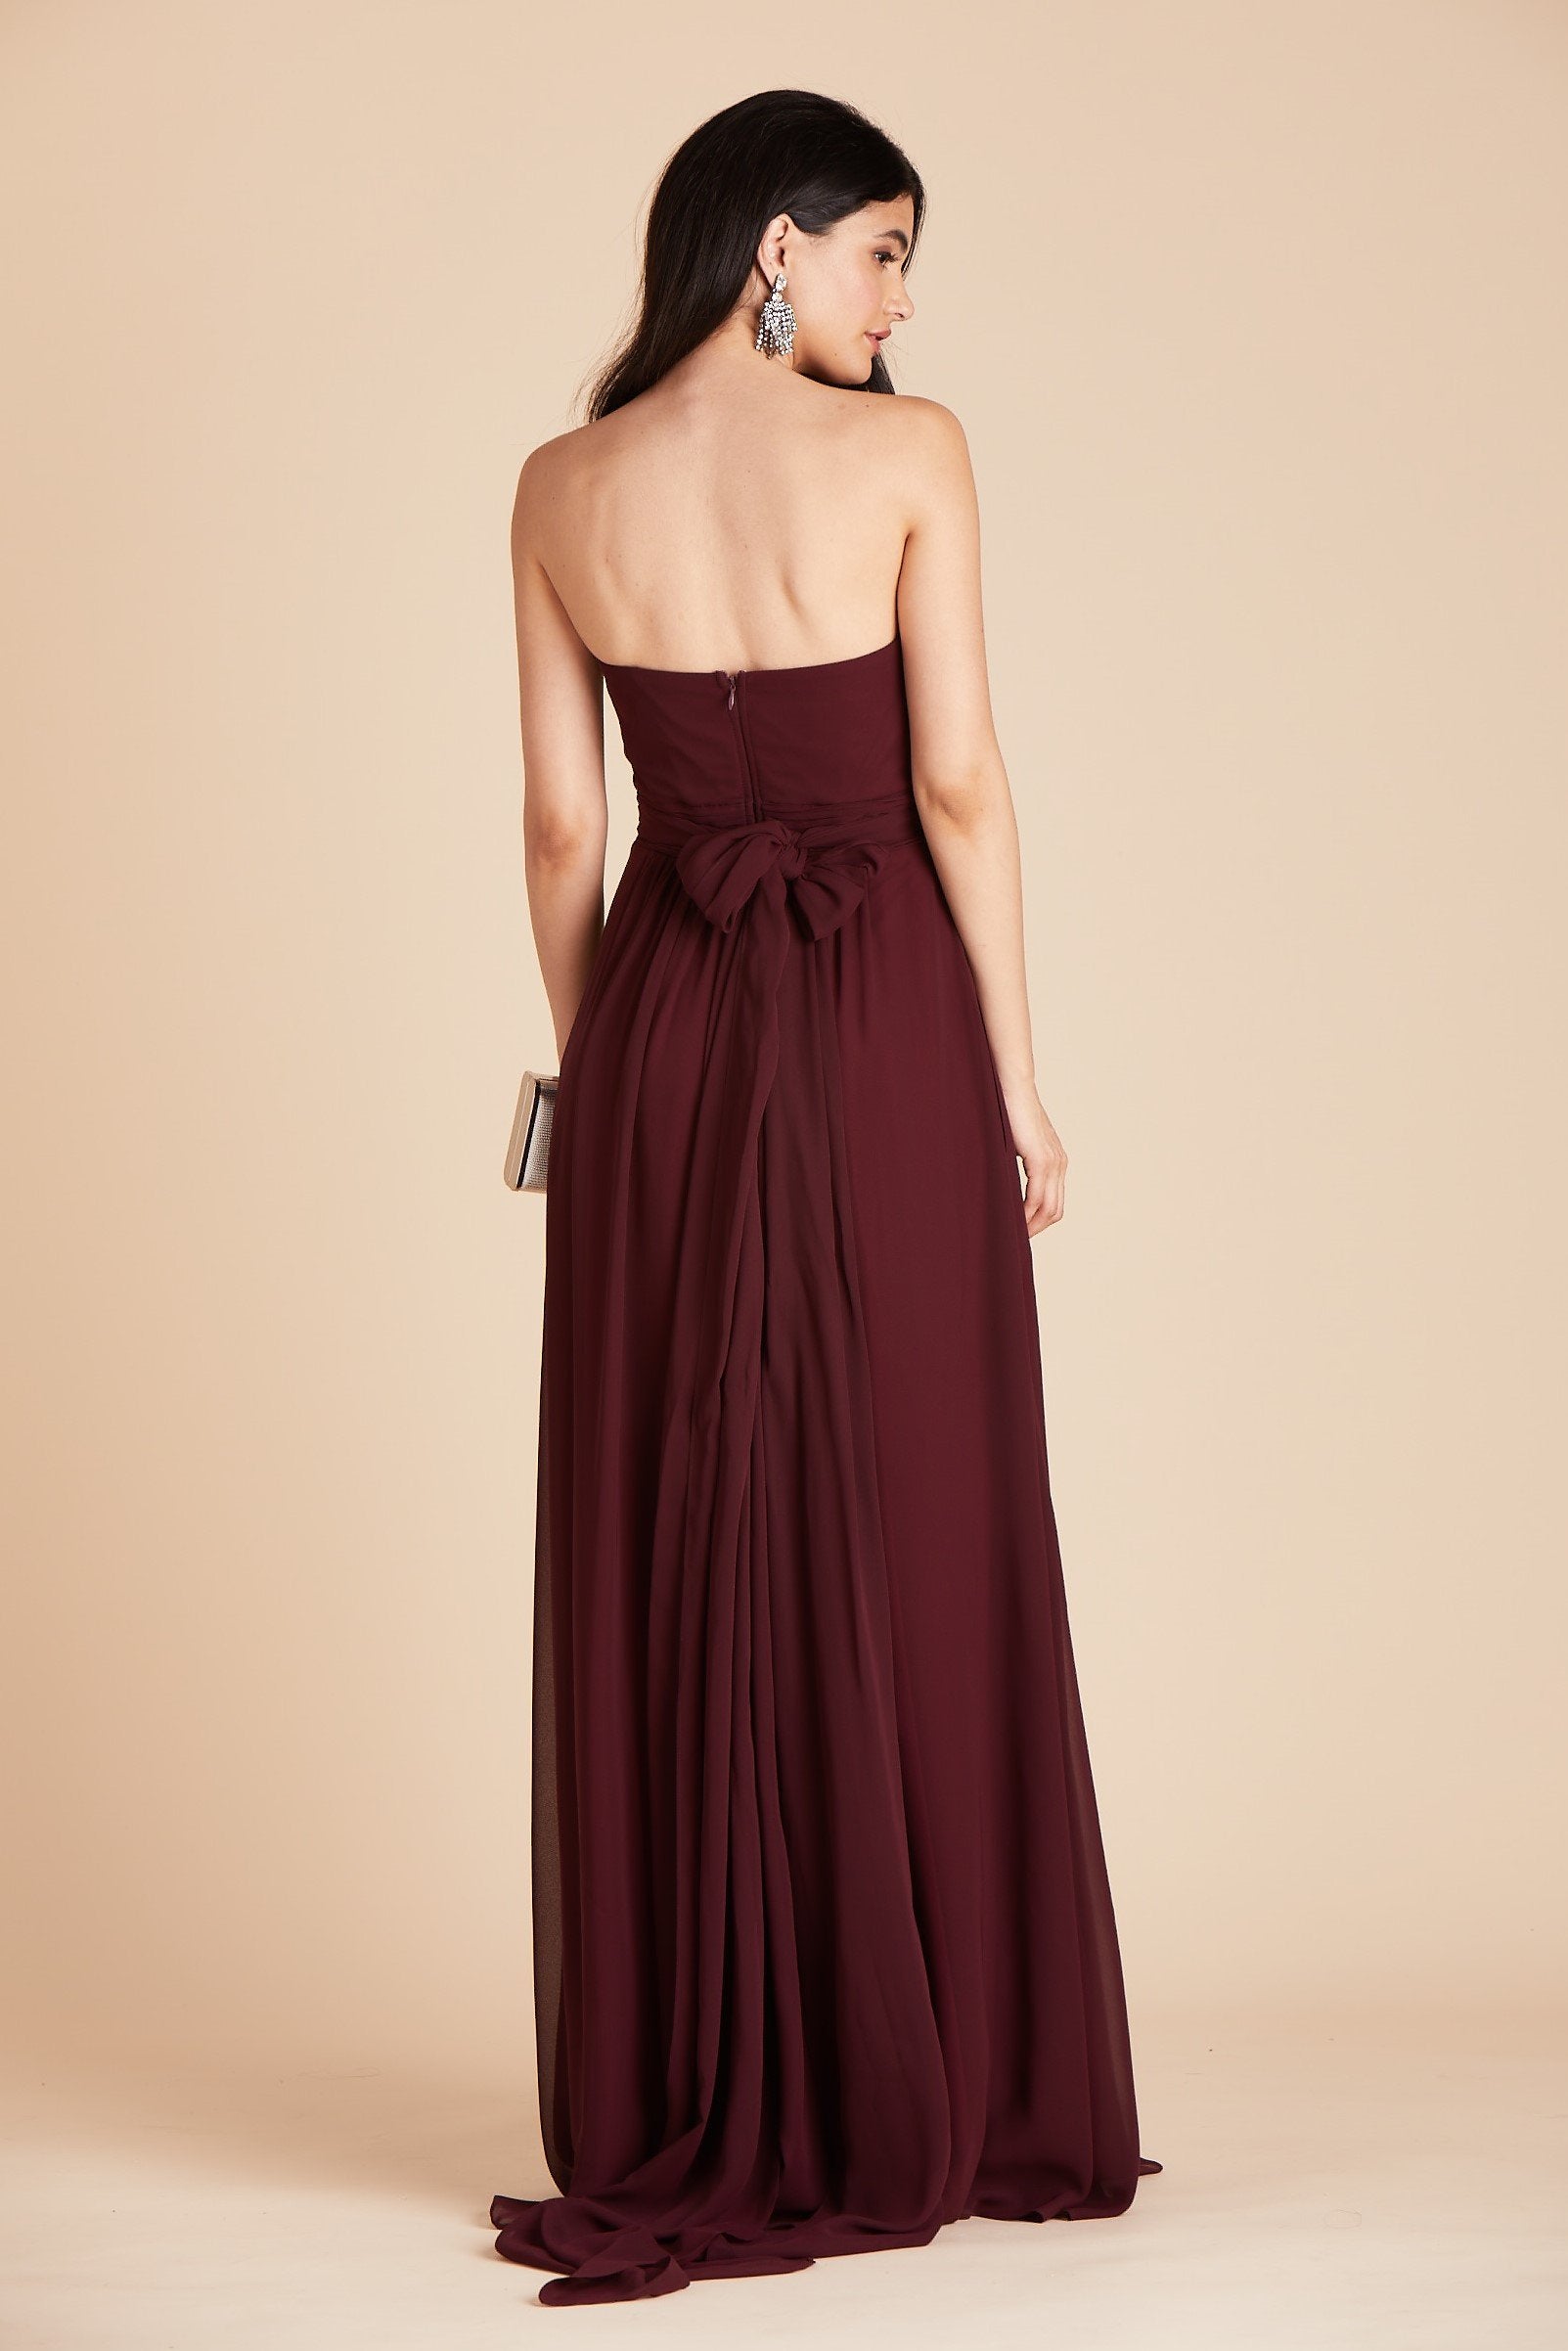 Grace convertible bridesmaid dress in cabernet burgundy chiffon by Birdy Grey, back view